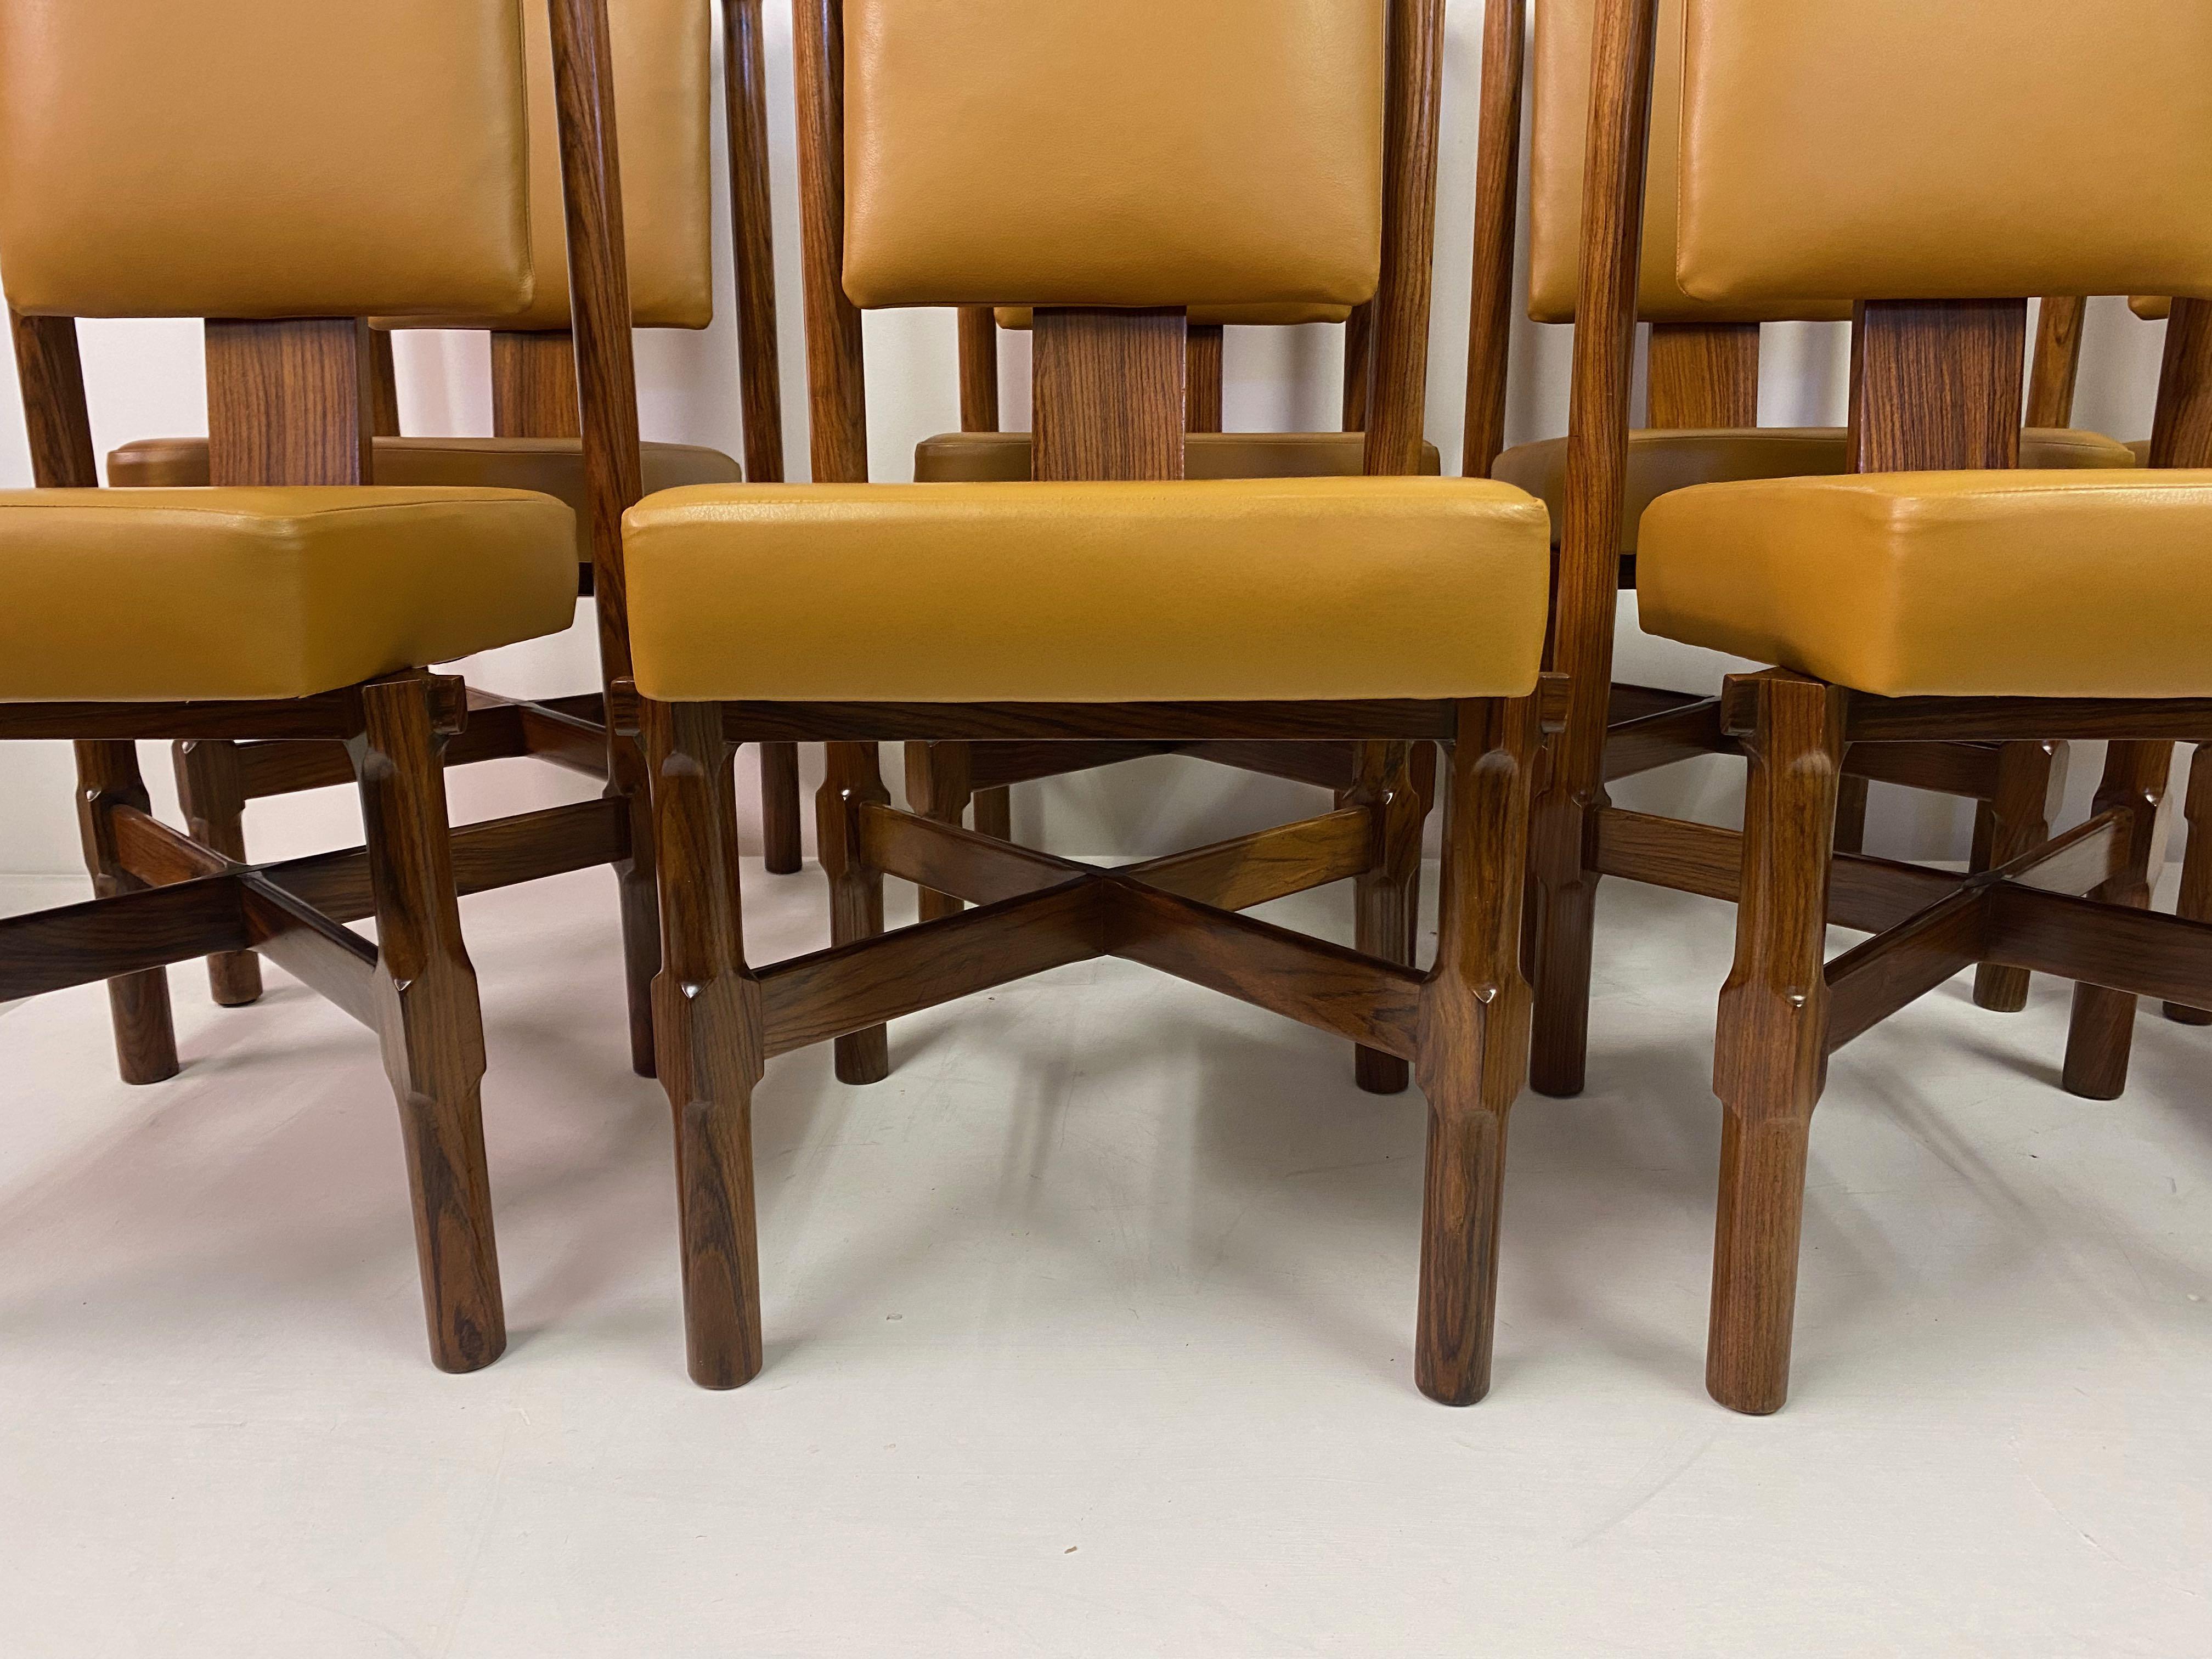 Eight dining chairs

Iroko frame

New leather upholstery

Professionally restored

Seat height 45cm

Italian 1960s.